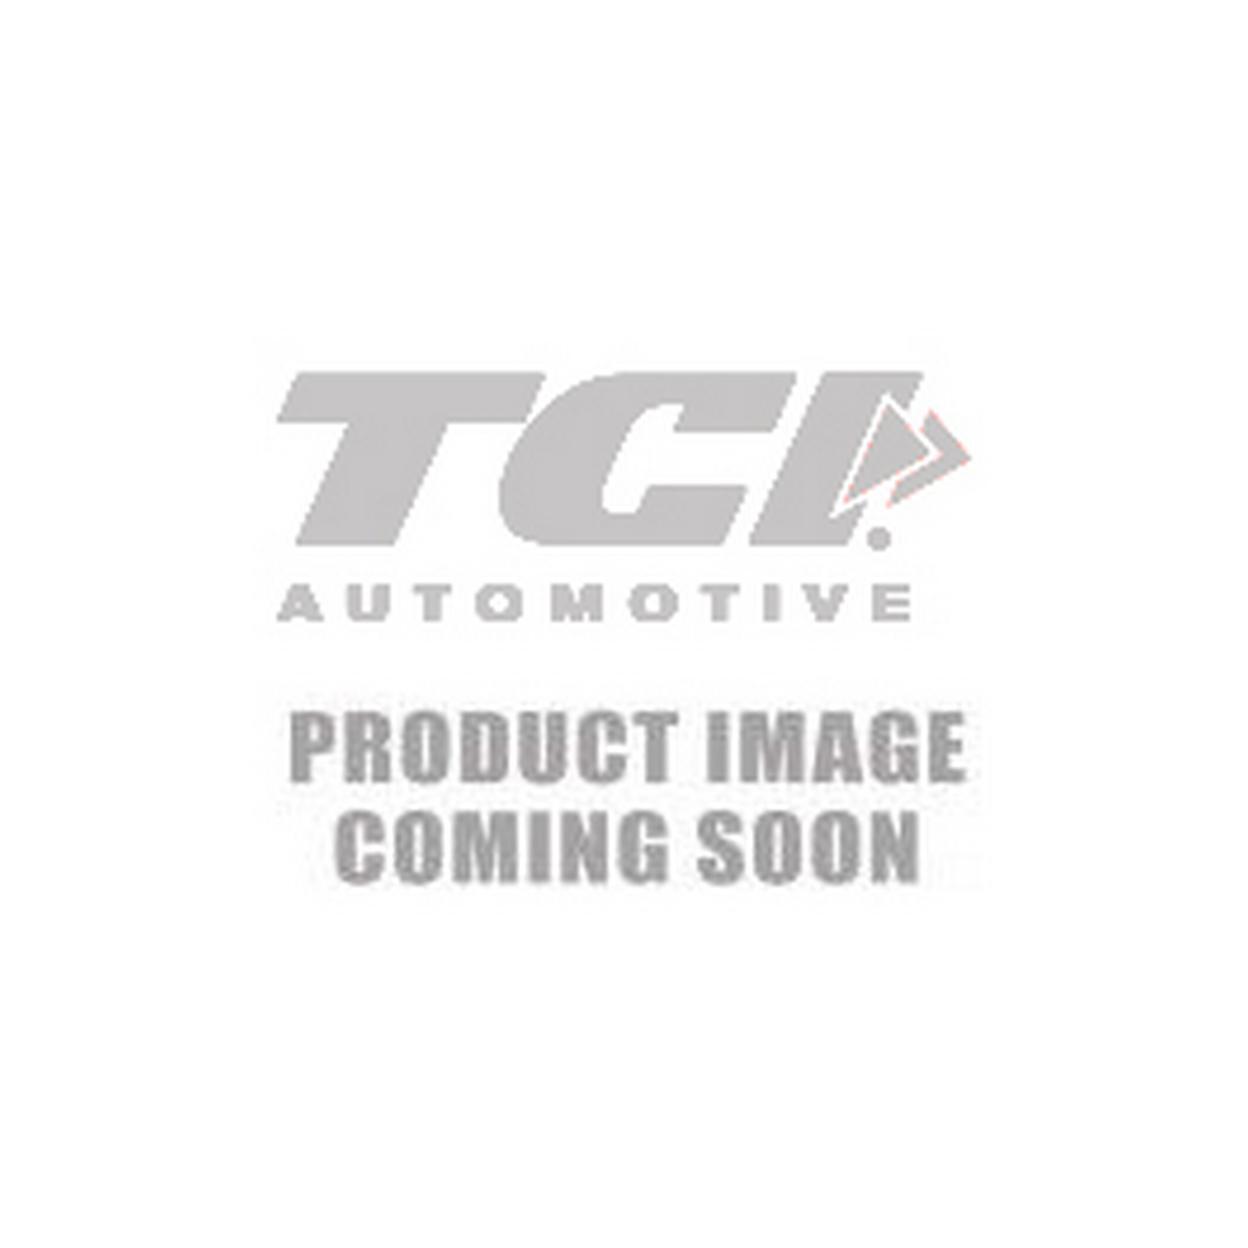 700R4/4L60E 10 Vane Billet Rot Transmission and Transaxle - Automatic Automatic